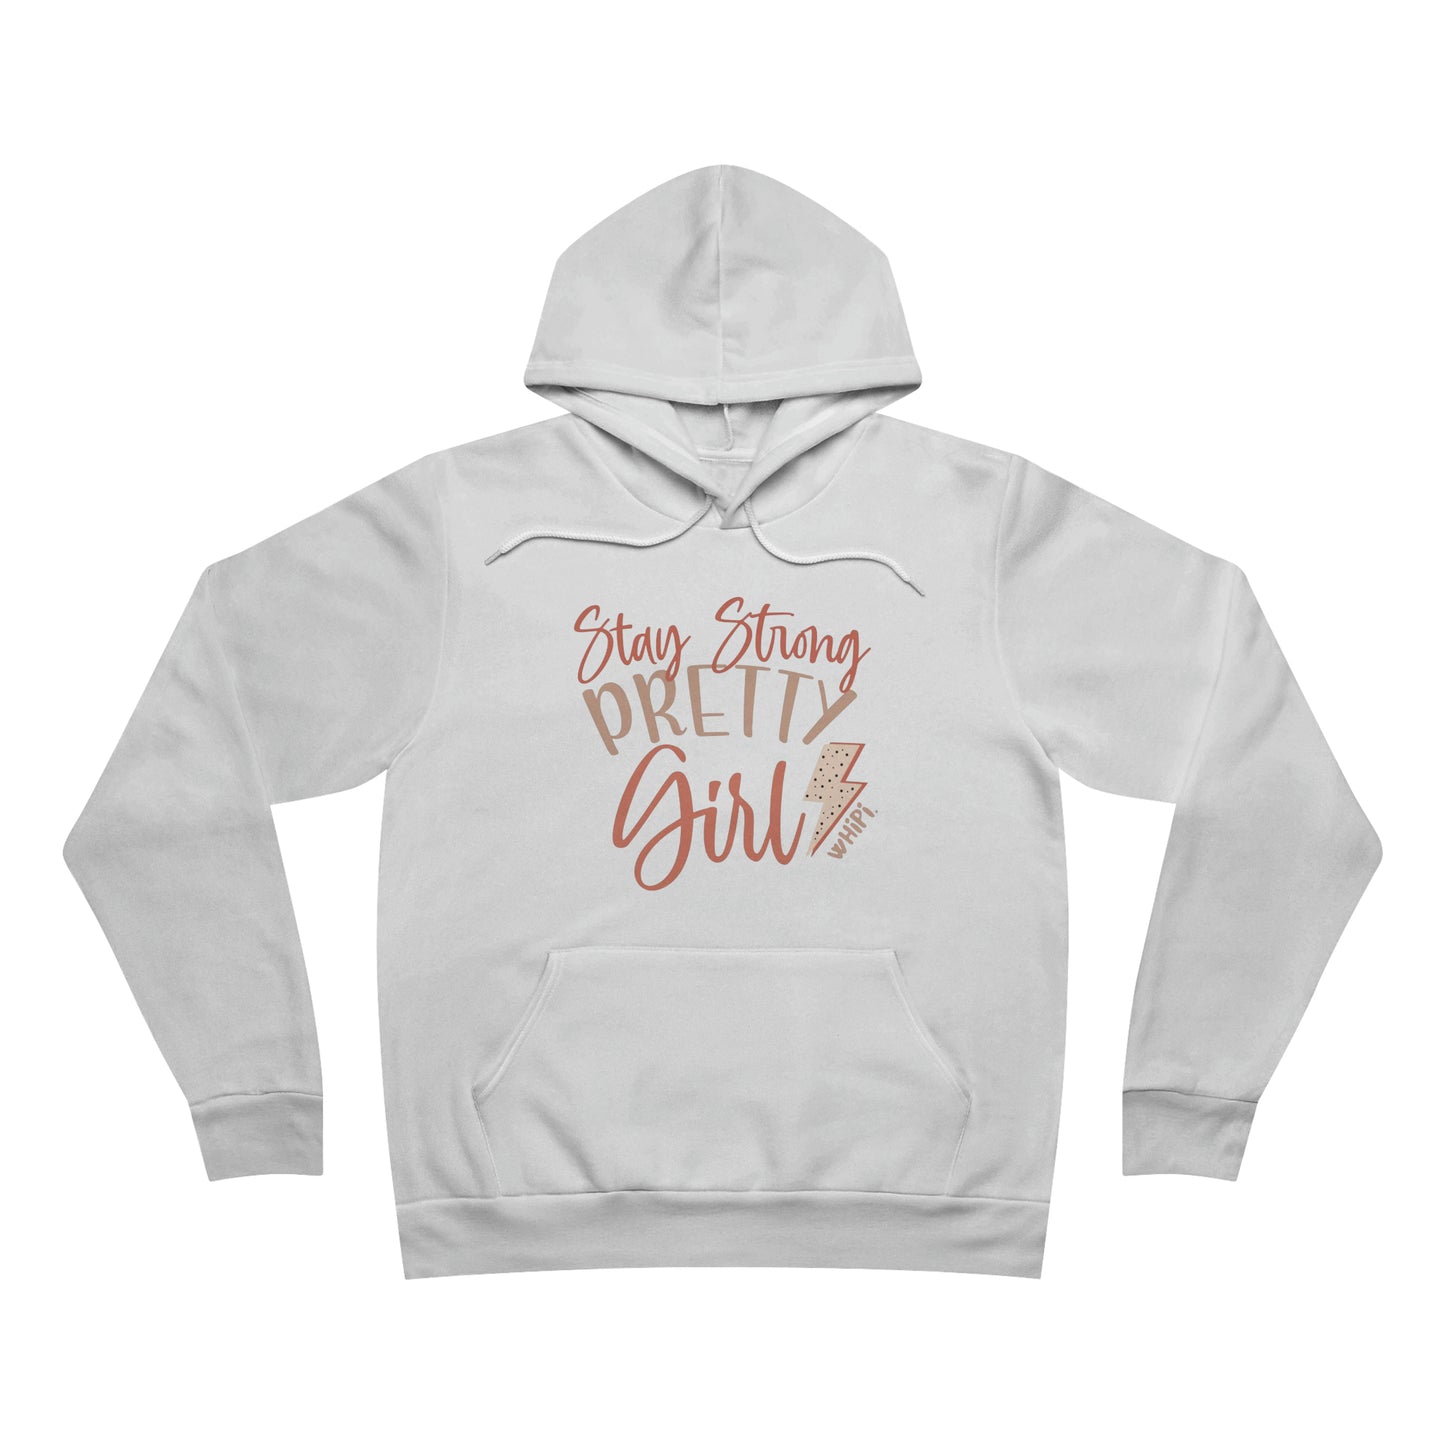 Stay Strong Pretty Girl Hoodie